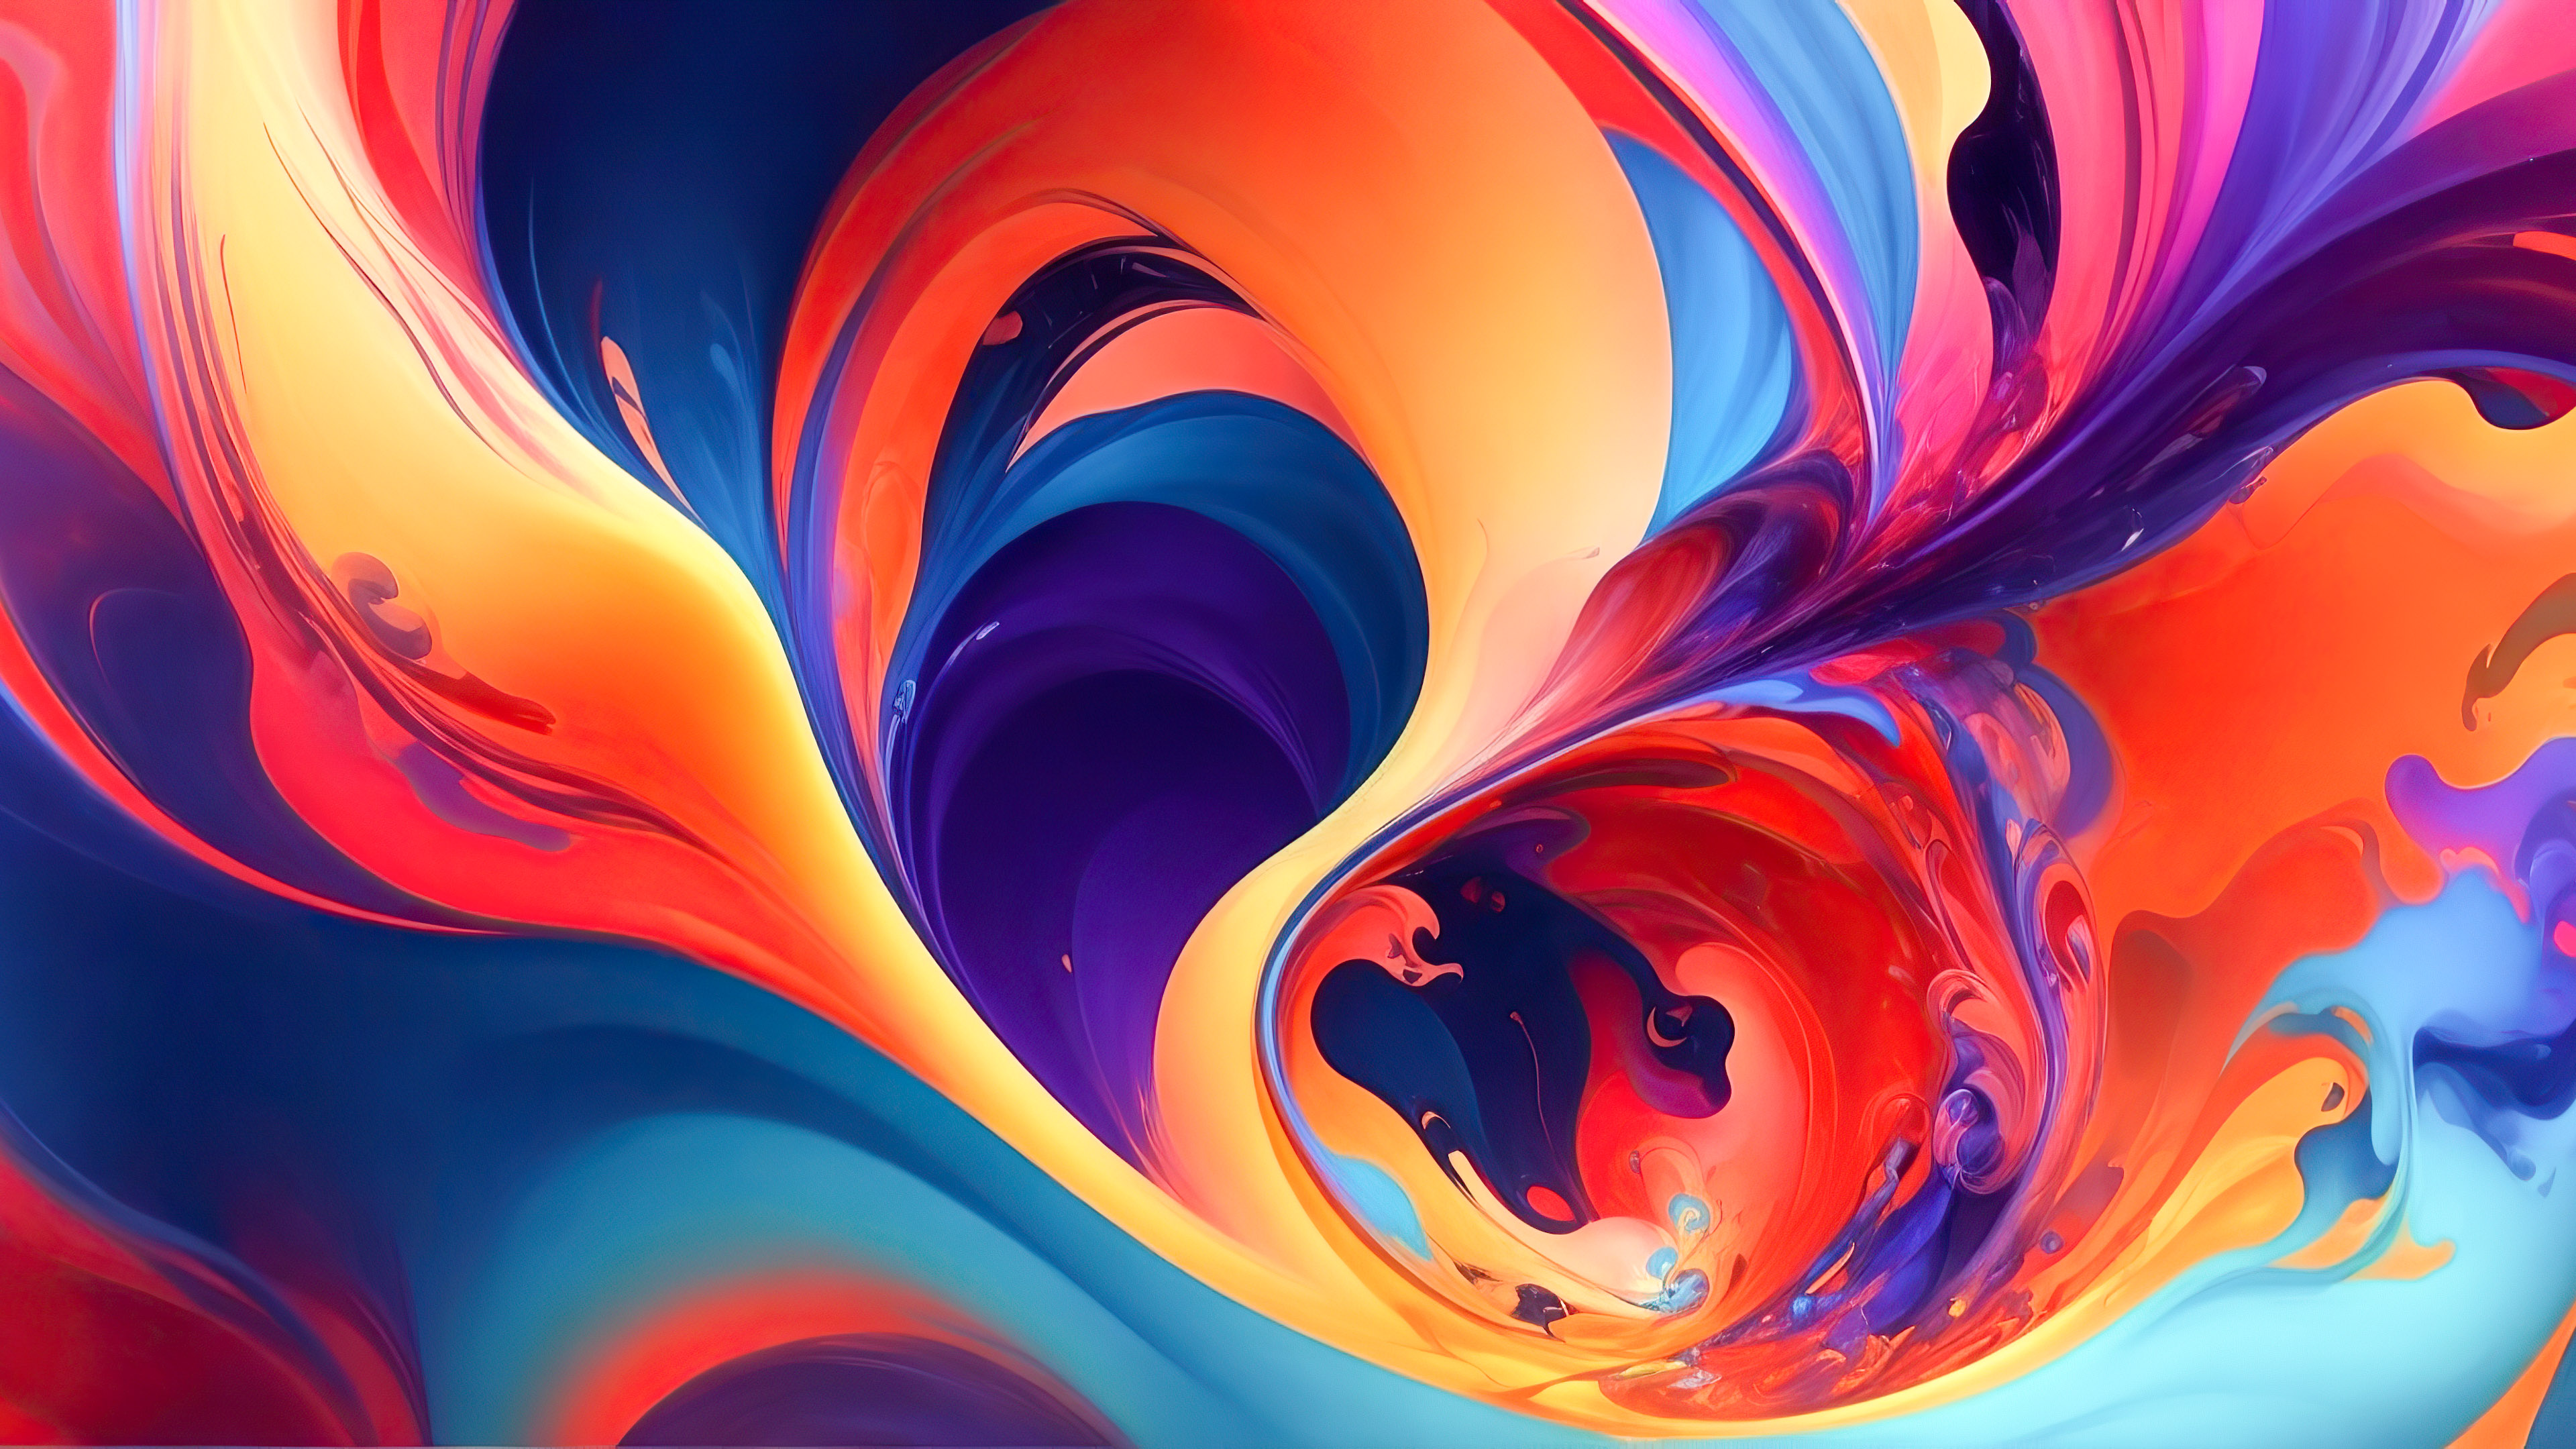 Experience the vivid expression of 4K abstract art wallpaper, portraying chaos and spiritualism through powerful colors.